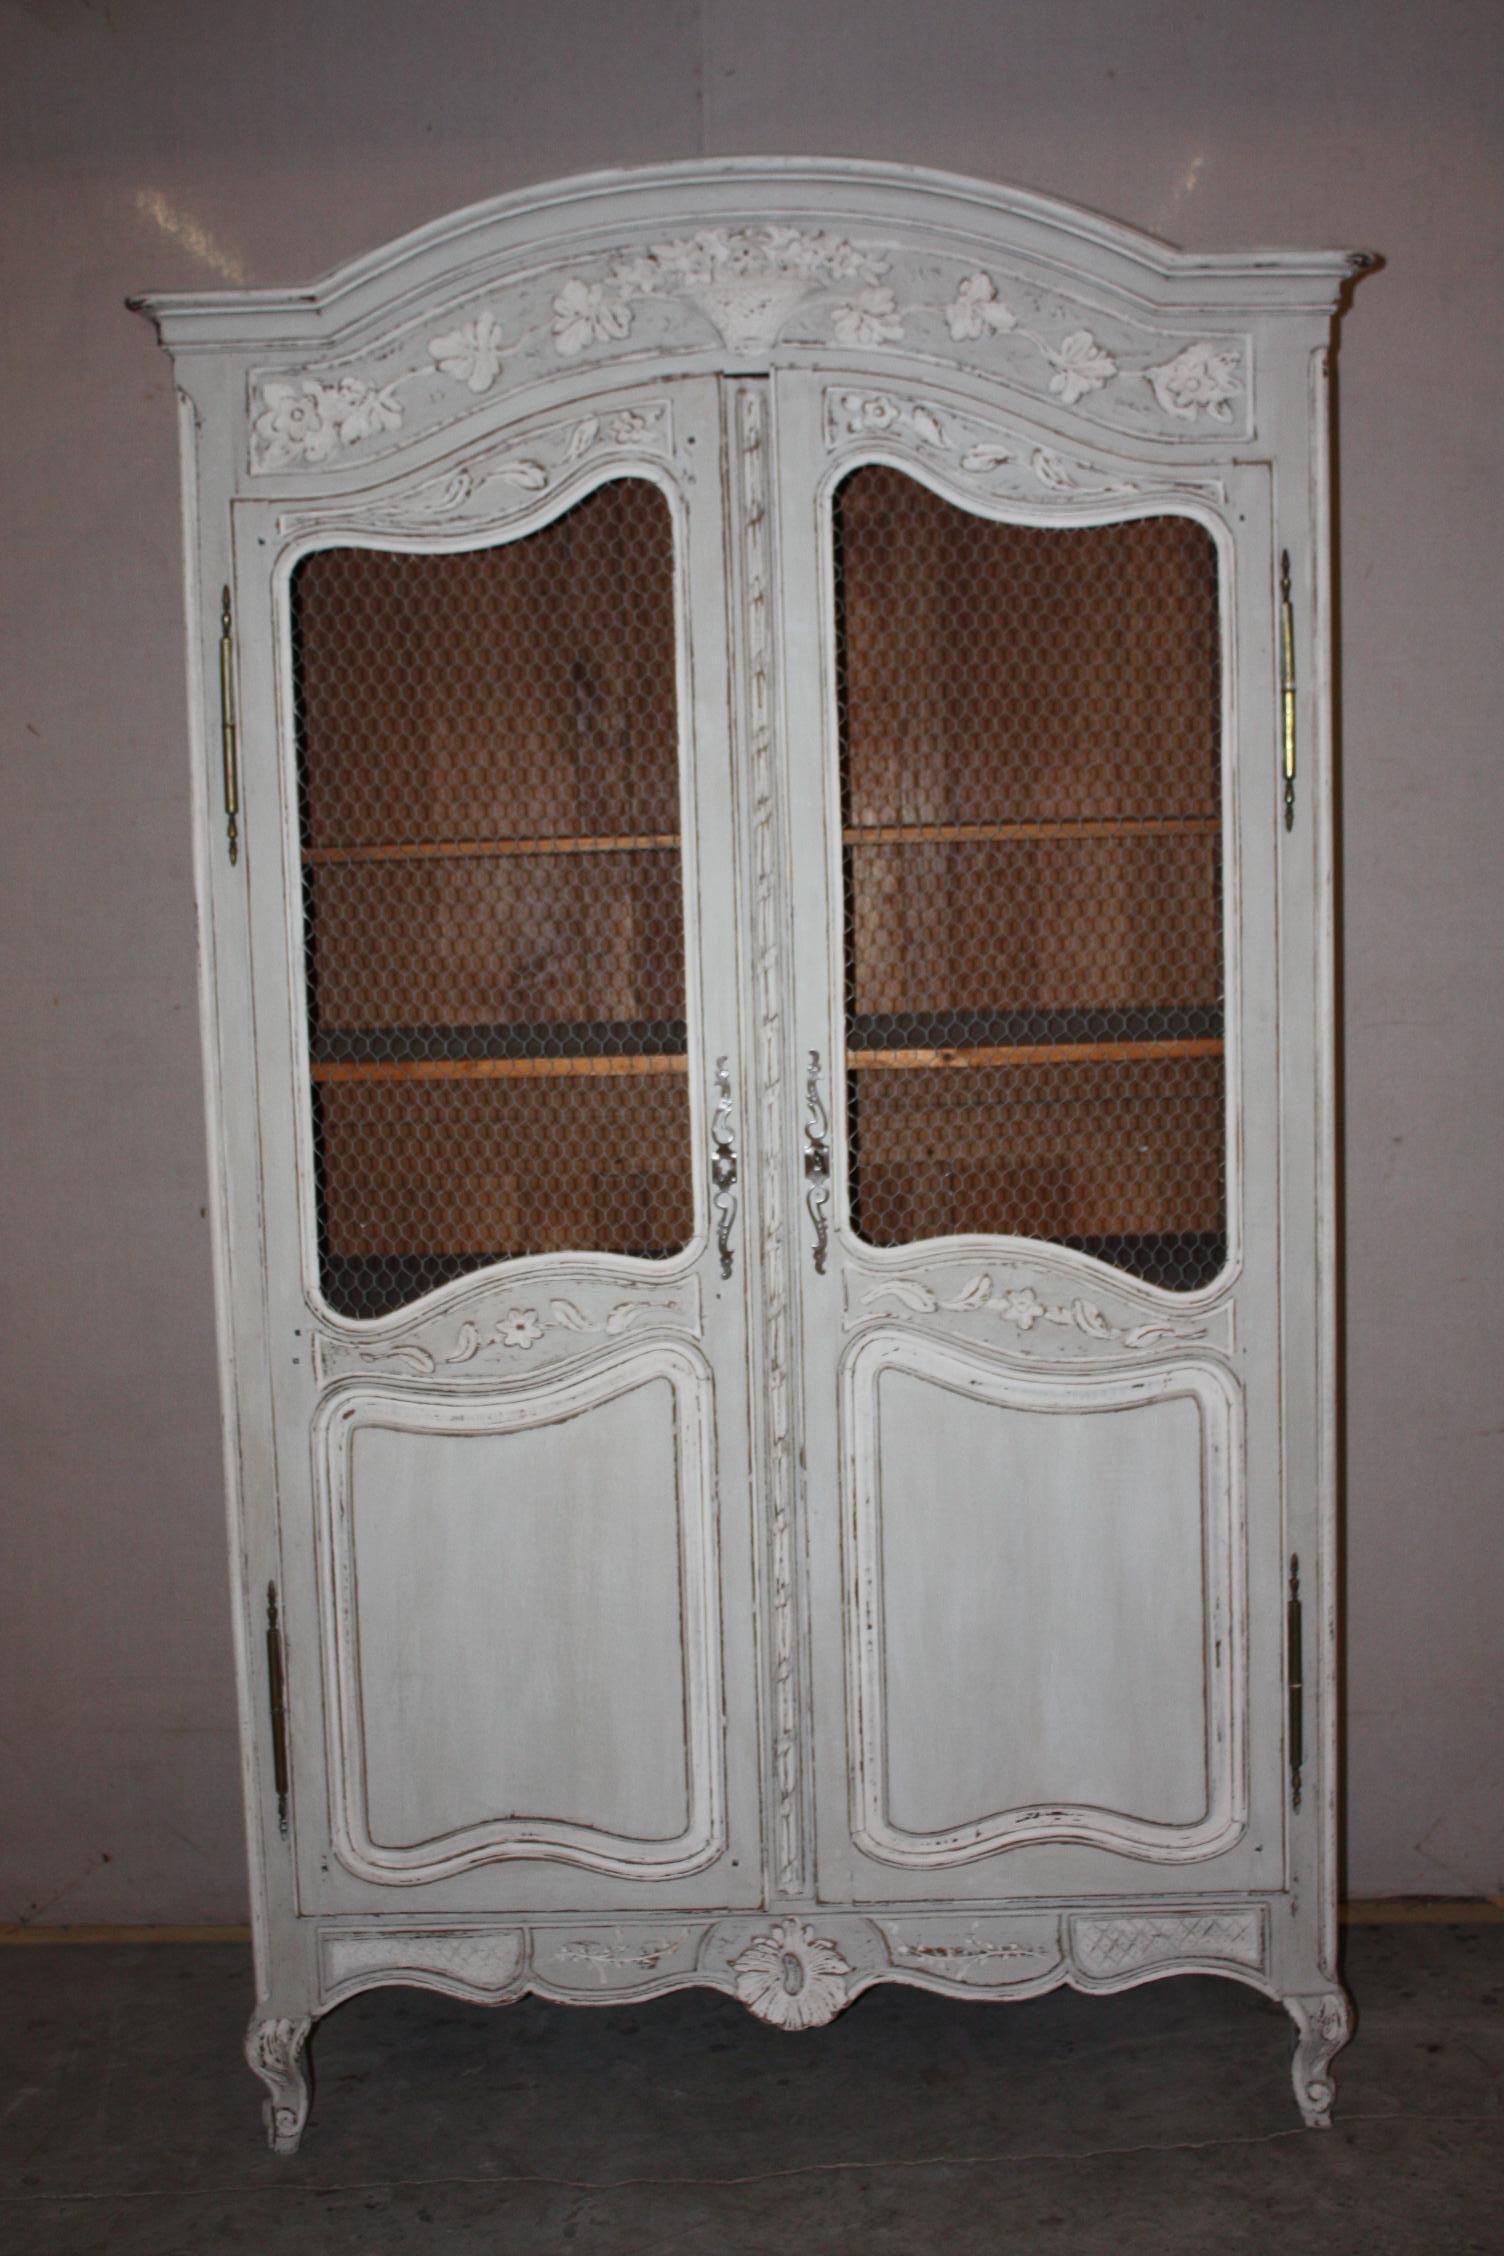 This is a very nice French painted armoire that dates to the late 1800s-early 1900s. It has a chicken wire upper panel on the doors. The shelves are adjustable.